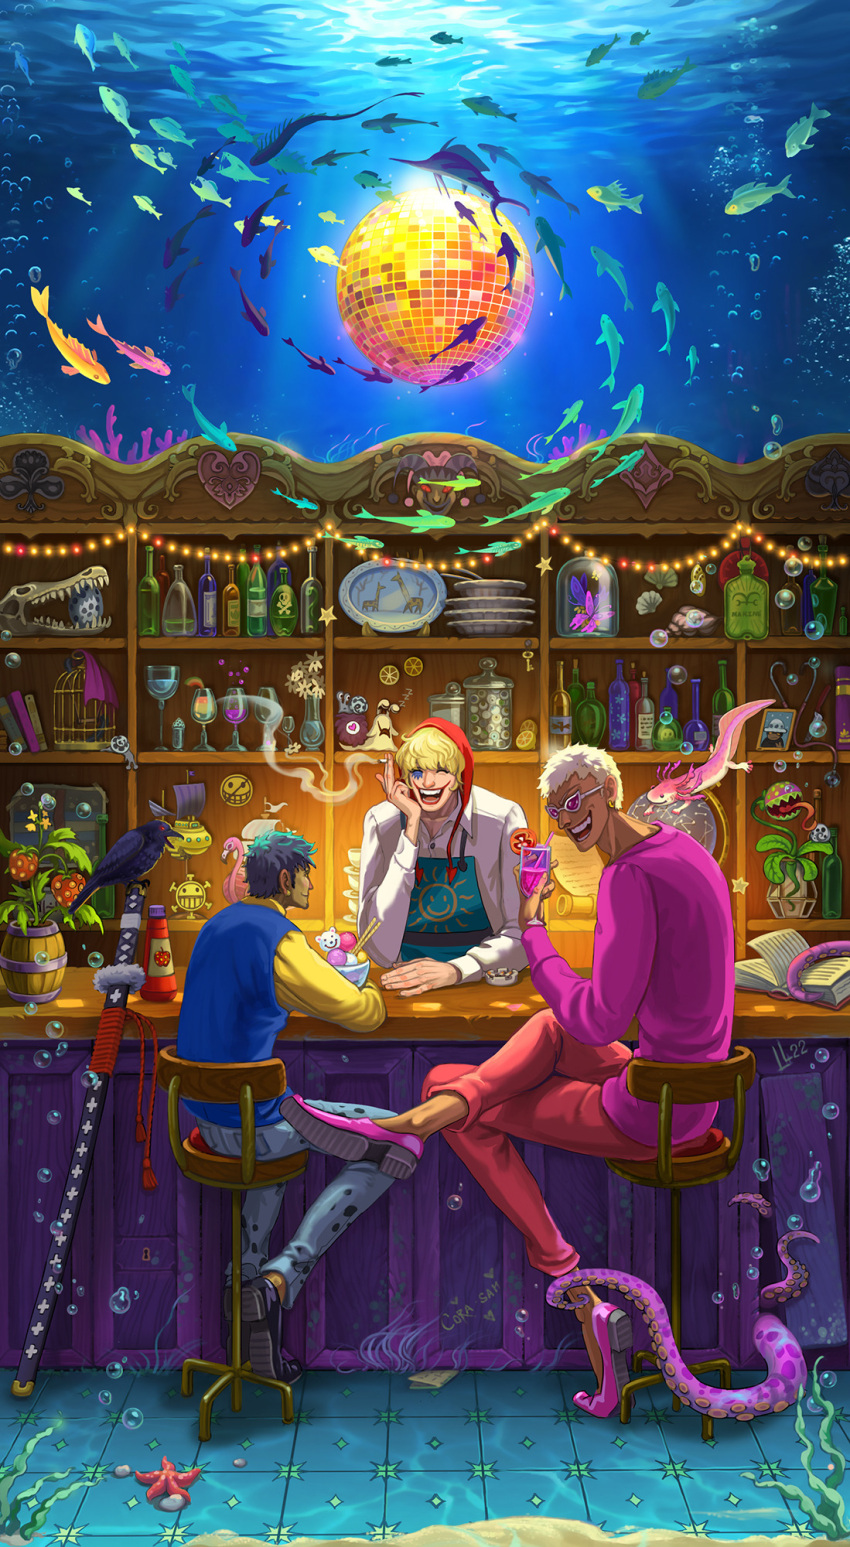 3boys algae apron ashtray axolotl bar_(place) barrel birdcage black_hair blonde_hair blue_vest book bottle brothers bubble bug butterfly cage cigarette closed_eyes closed_mouth cocktail_glass collared_shirt crossed_legs cup den_den_mushi denim disco_ball donquixote_doflamingo donquixote_rocinante drinking_glass earrings food fruit highres holding holding_cigarette ice_cream_cup jeans jewelry lemon lemon_slice li-louie looking_at_another makeup male_focus multiple_boys ocean one_piece open_mouth pants photo_(object) pink_shirt plate print_apron red_pants shirt short_hair siblings sitting skull smile smiley_face starfish sunglasses sword teeth tentacles trafalgar_law tropical_fish underwater vase vest weapon white_shirt wine_glass yellow_shirt